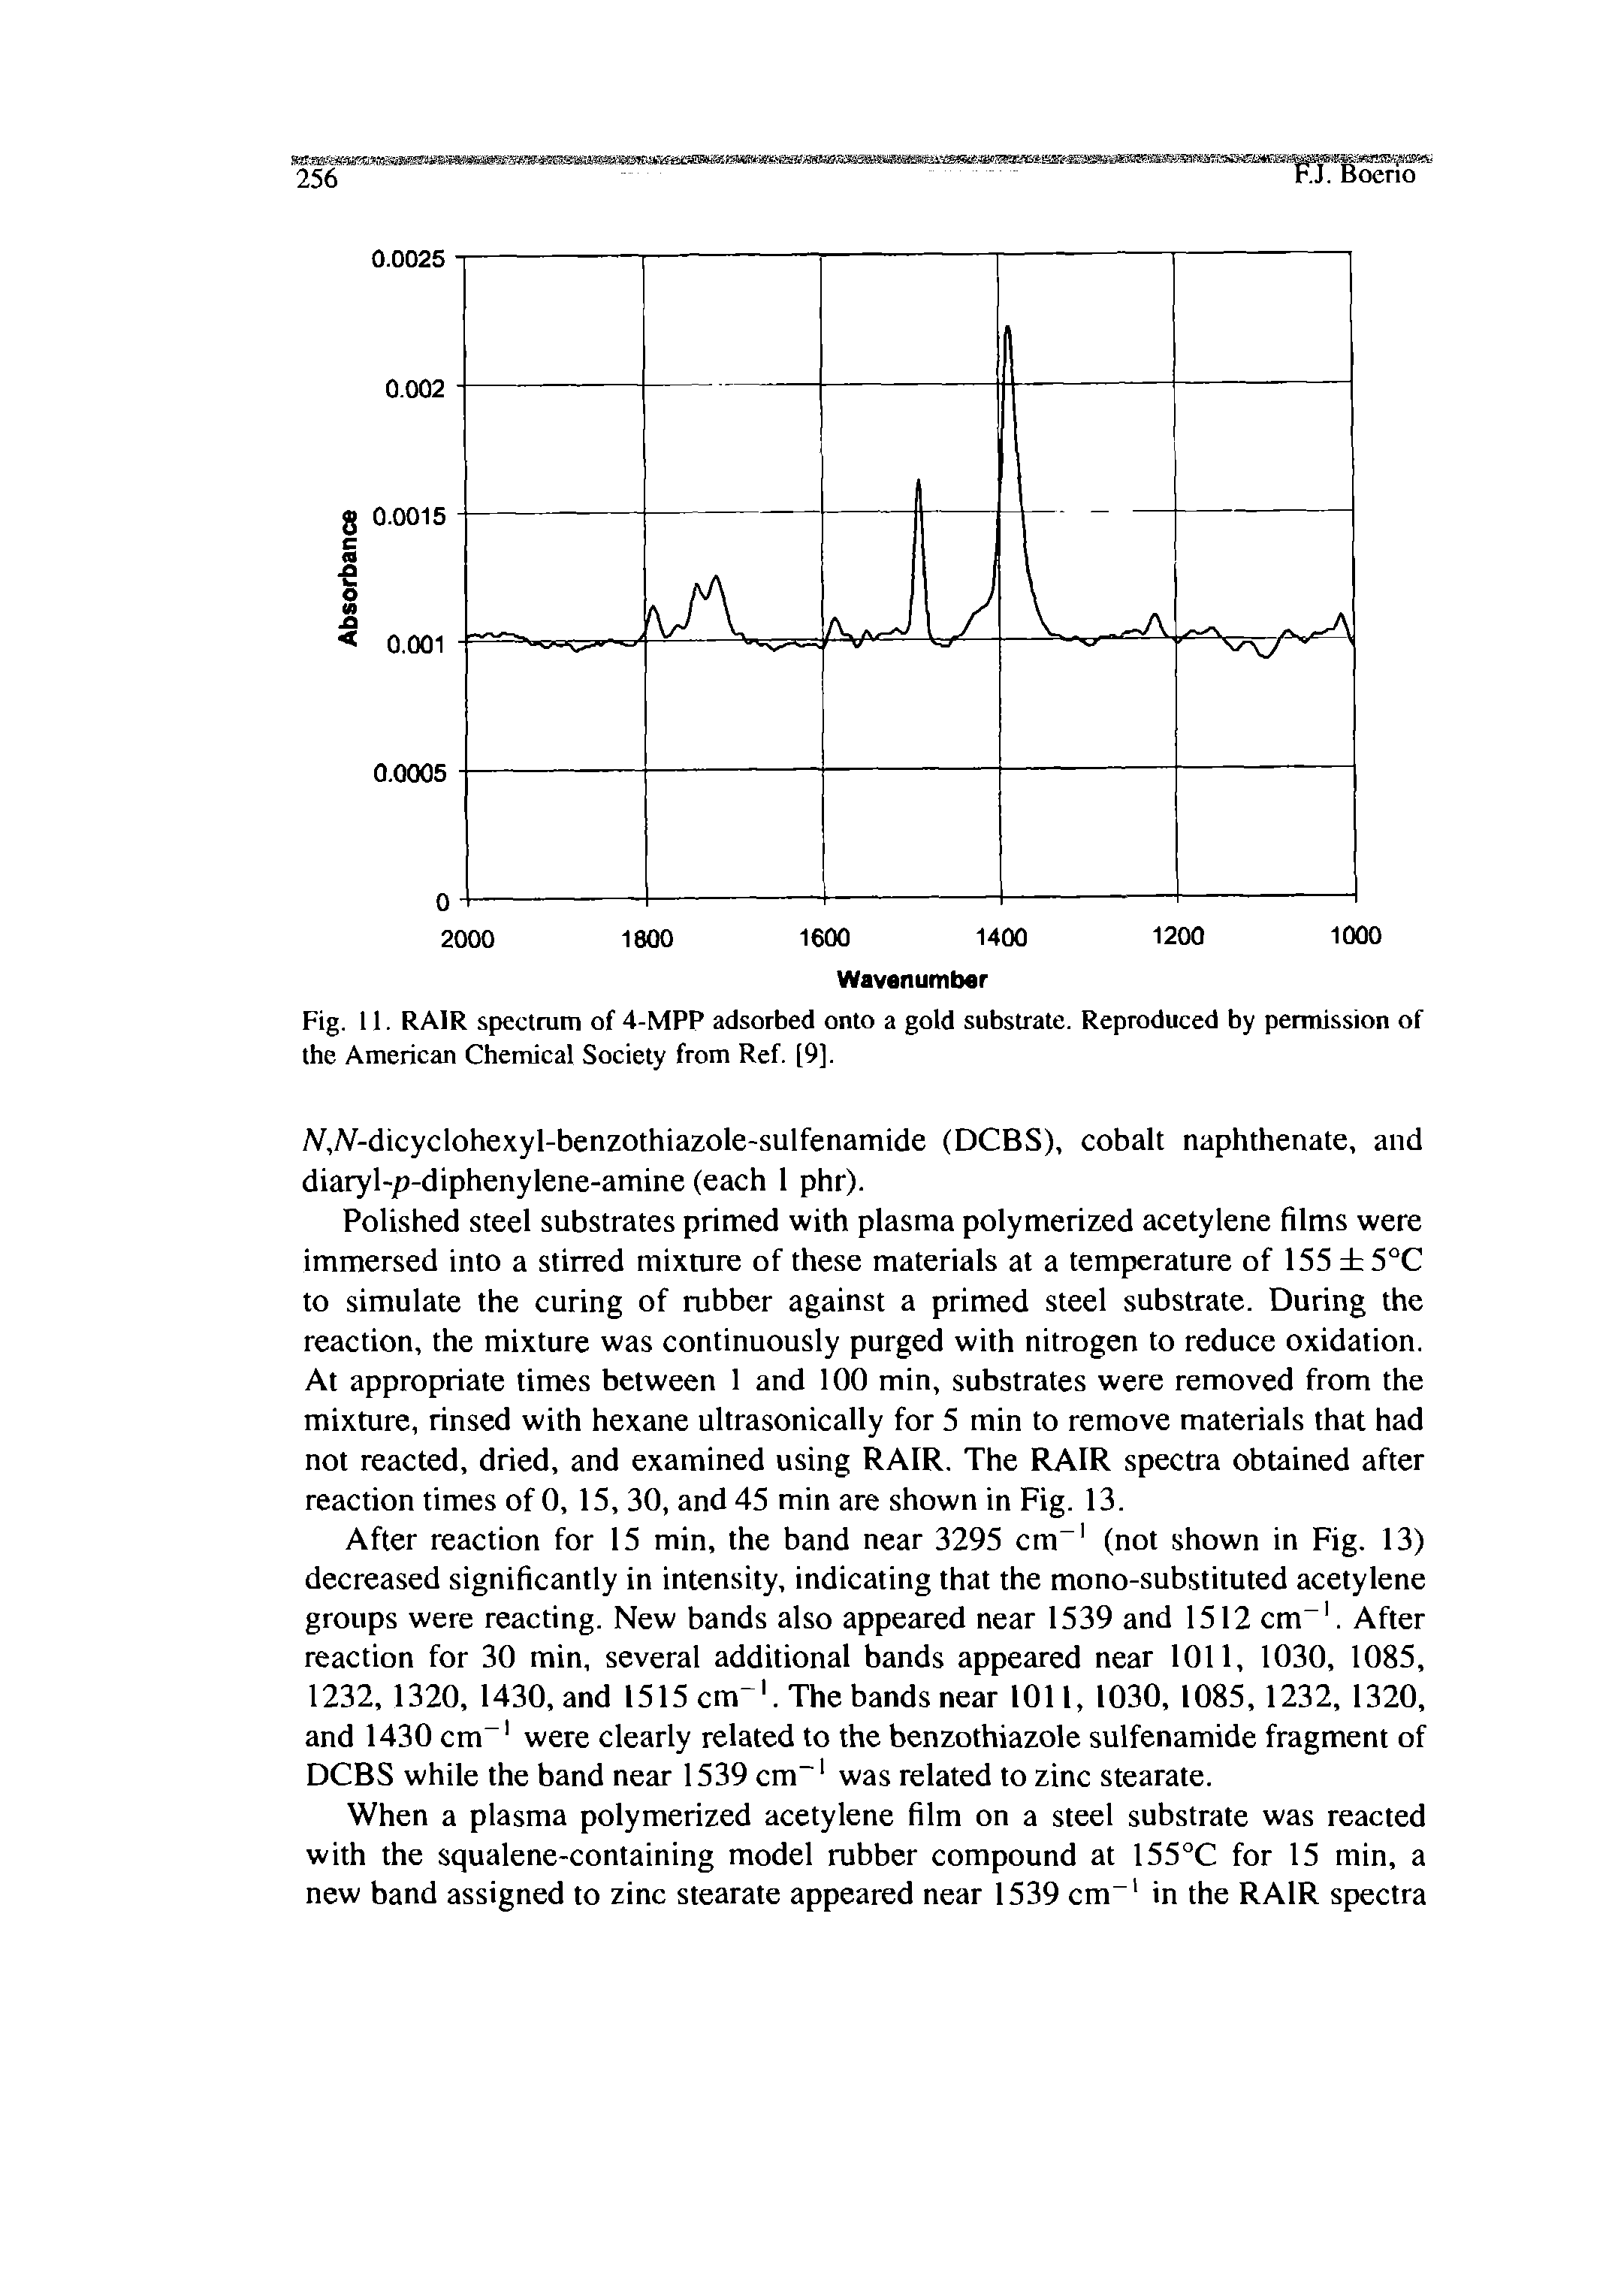 Fig. 11. RAIR spectrum of 4-MPP adsorbed onto a gold substrate. Reproduced by permission of the American Chemical Society from Ref. [9].